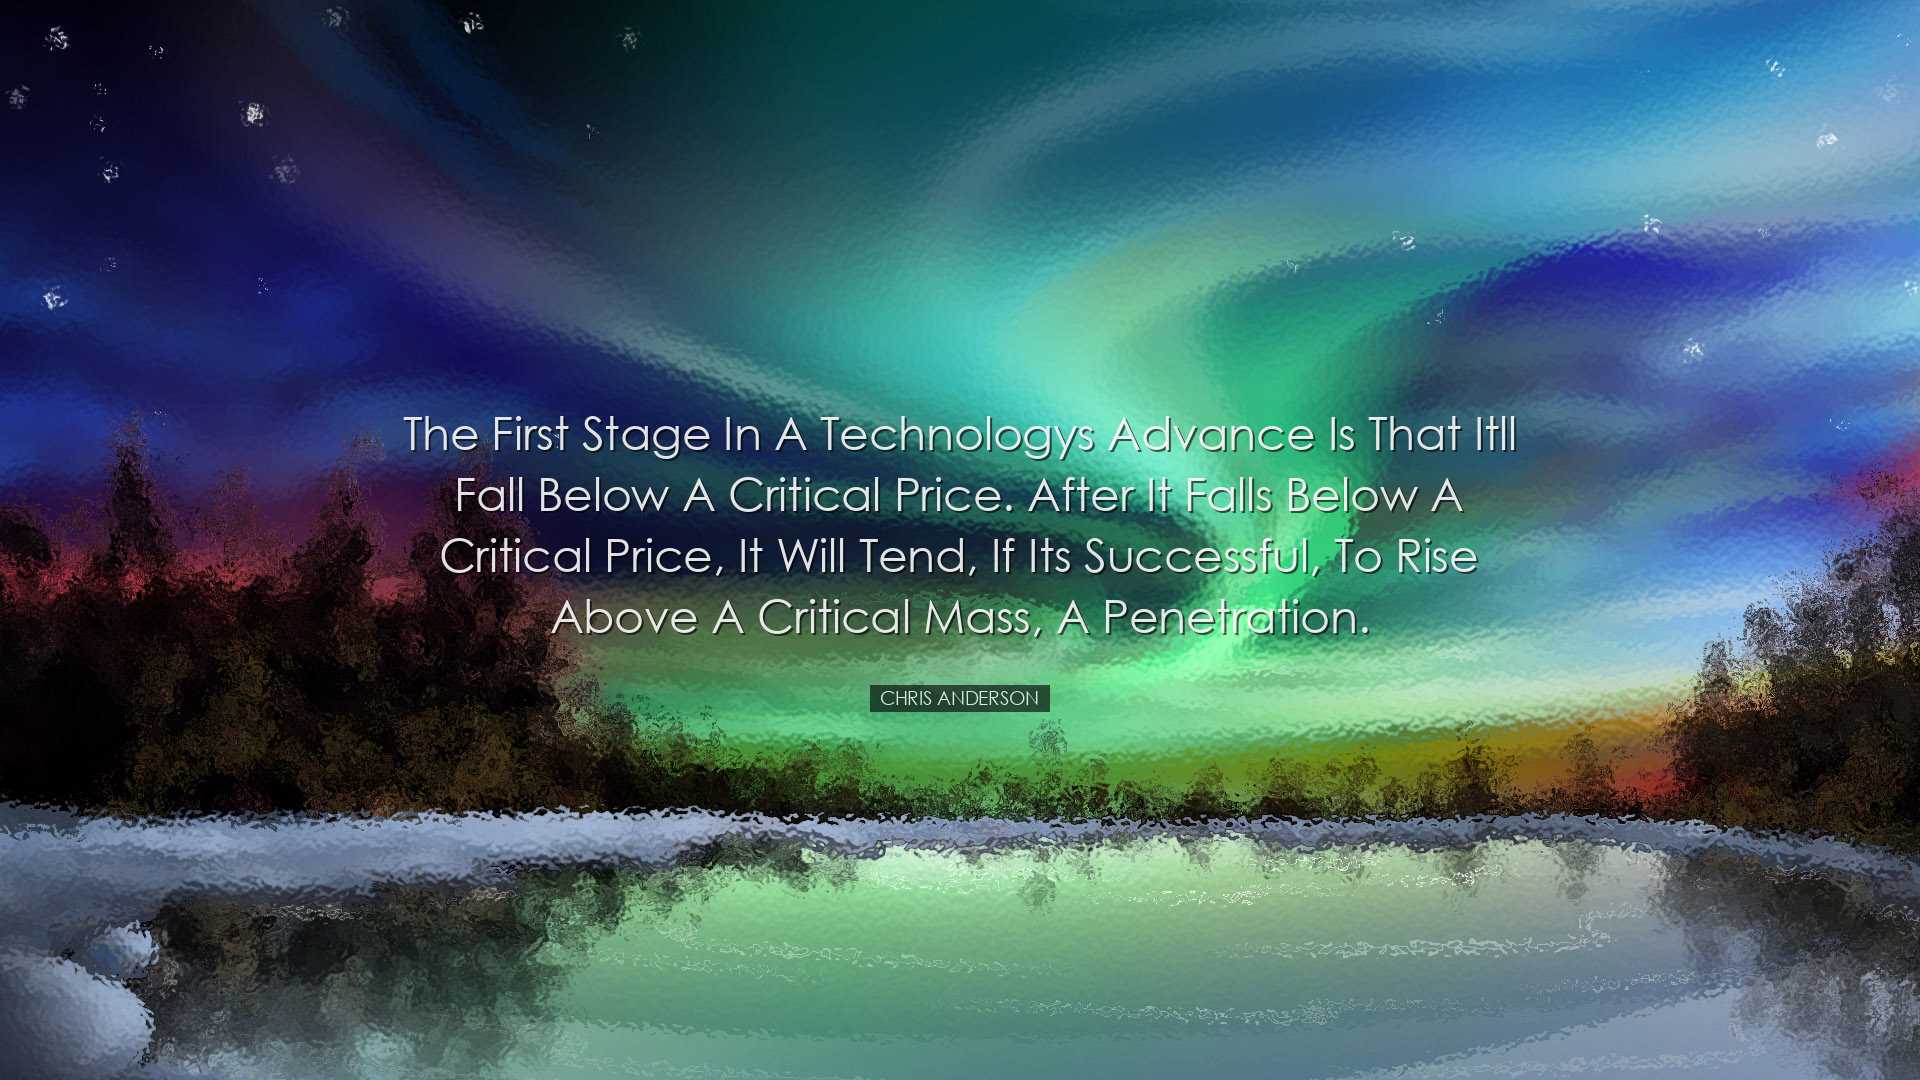 The first stage in a technologys advance is that itll fall below a